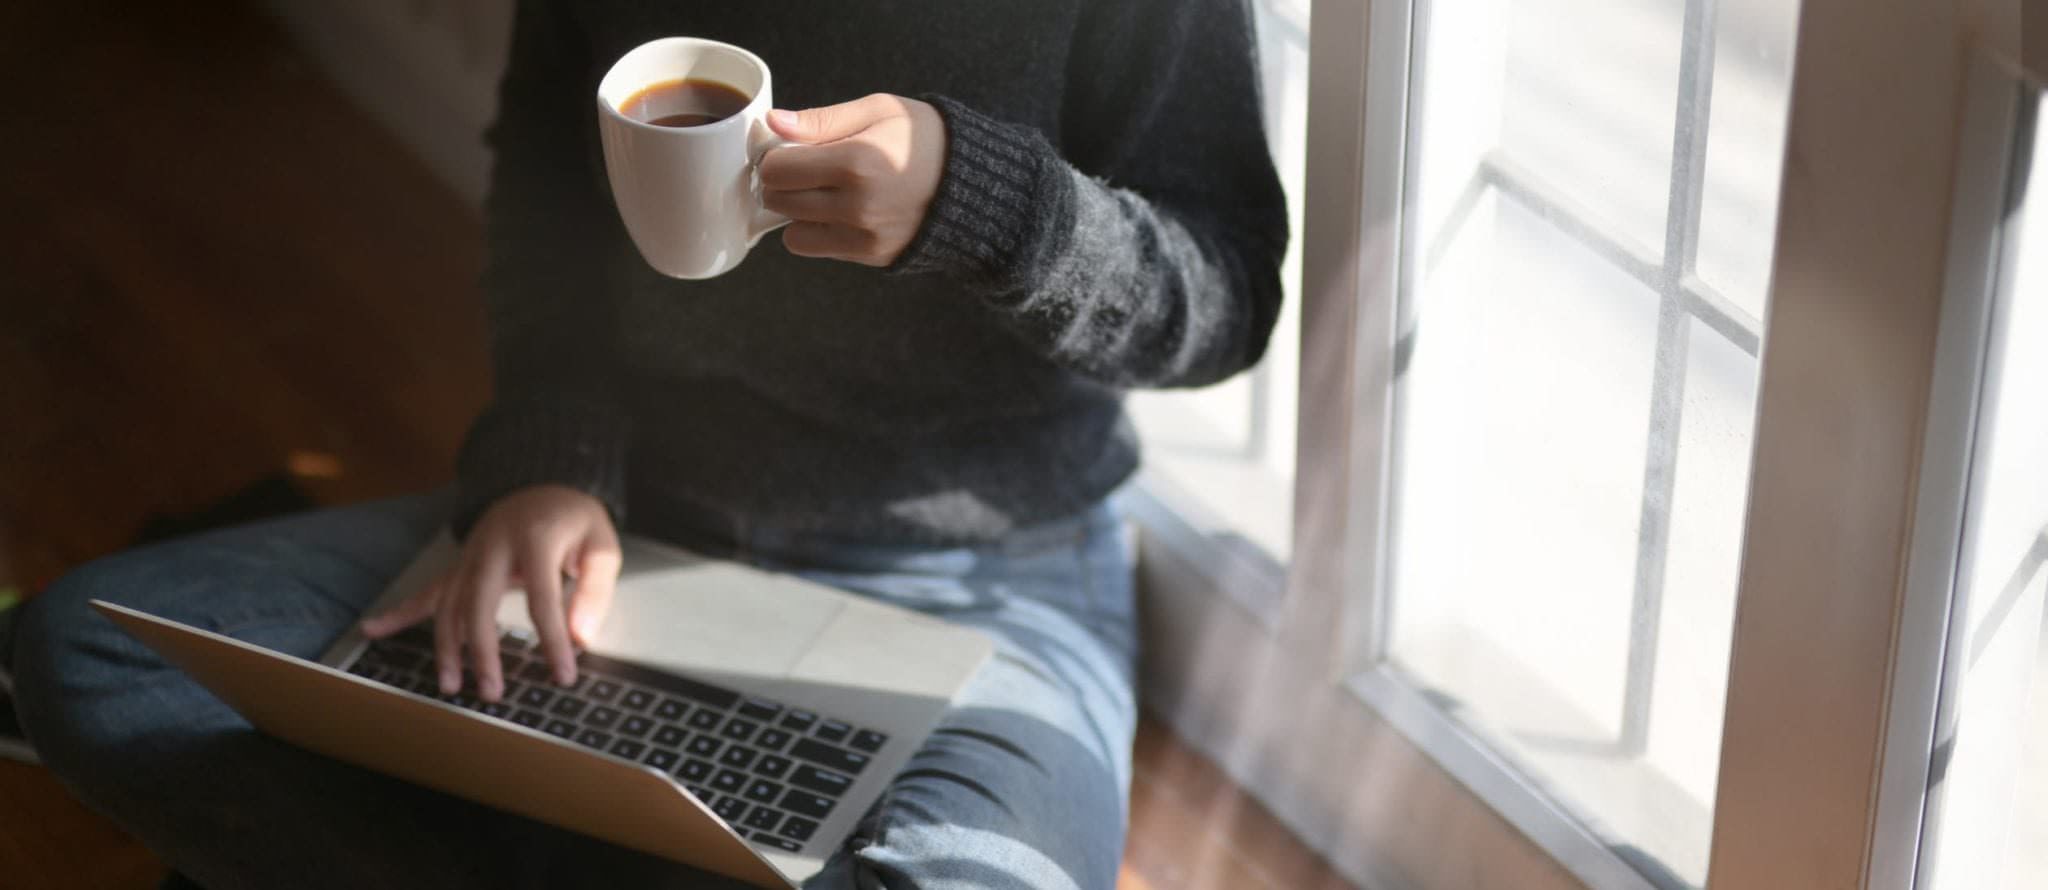 A person working from their laptop as drinking coffee at home during the coronavirus.